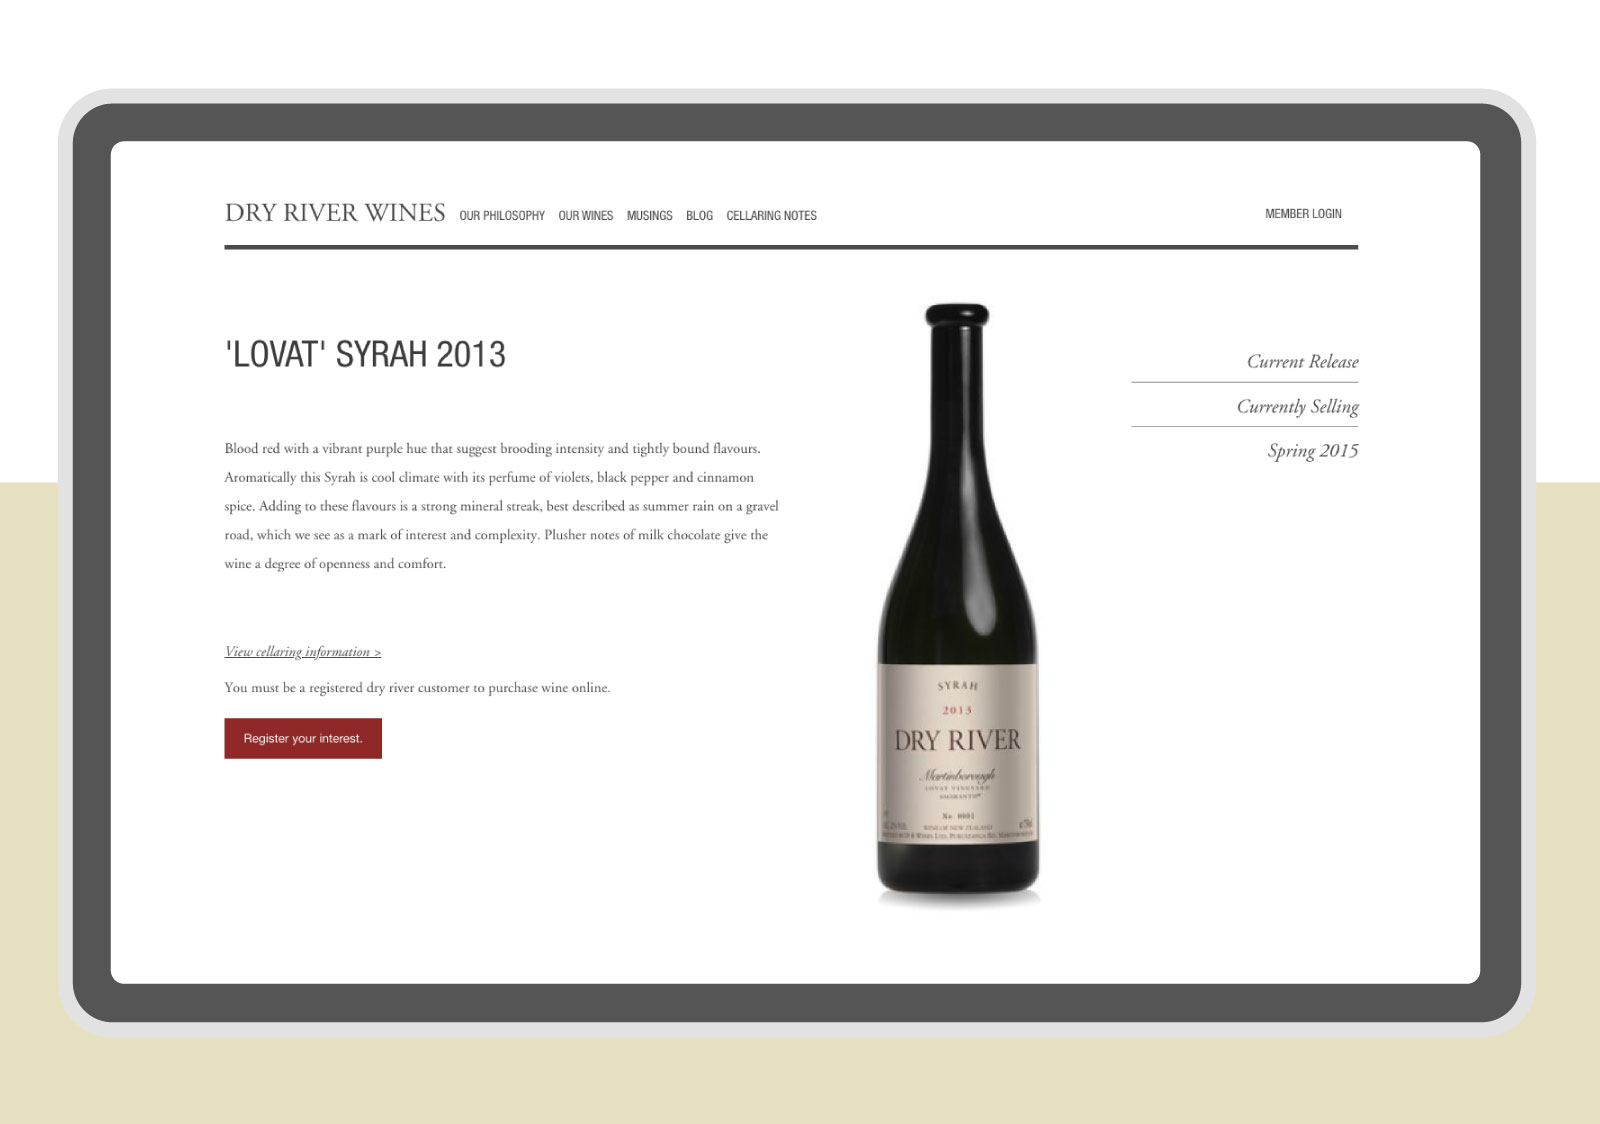 A screenshot of the product page showcasing a wine bottle and its description